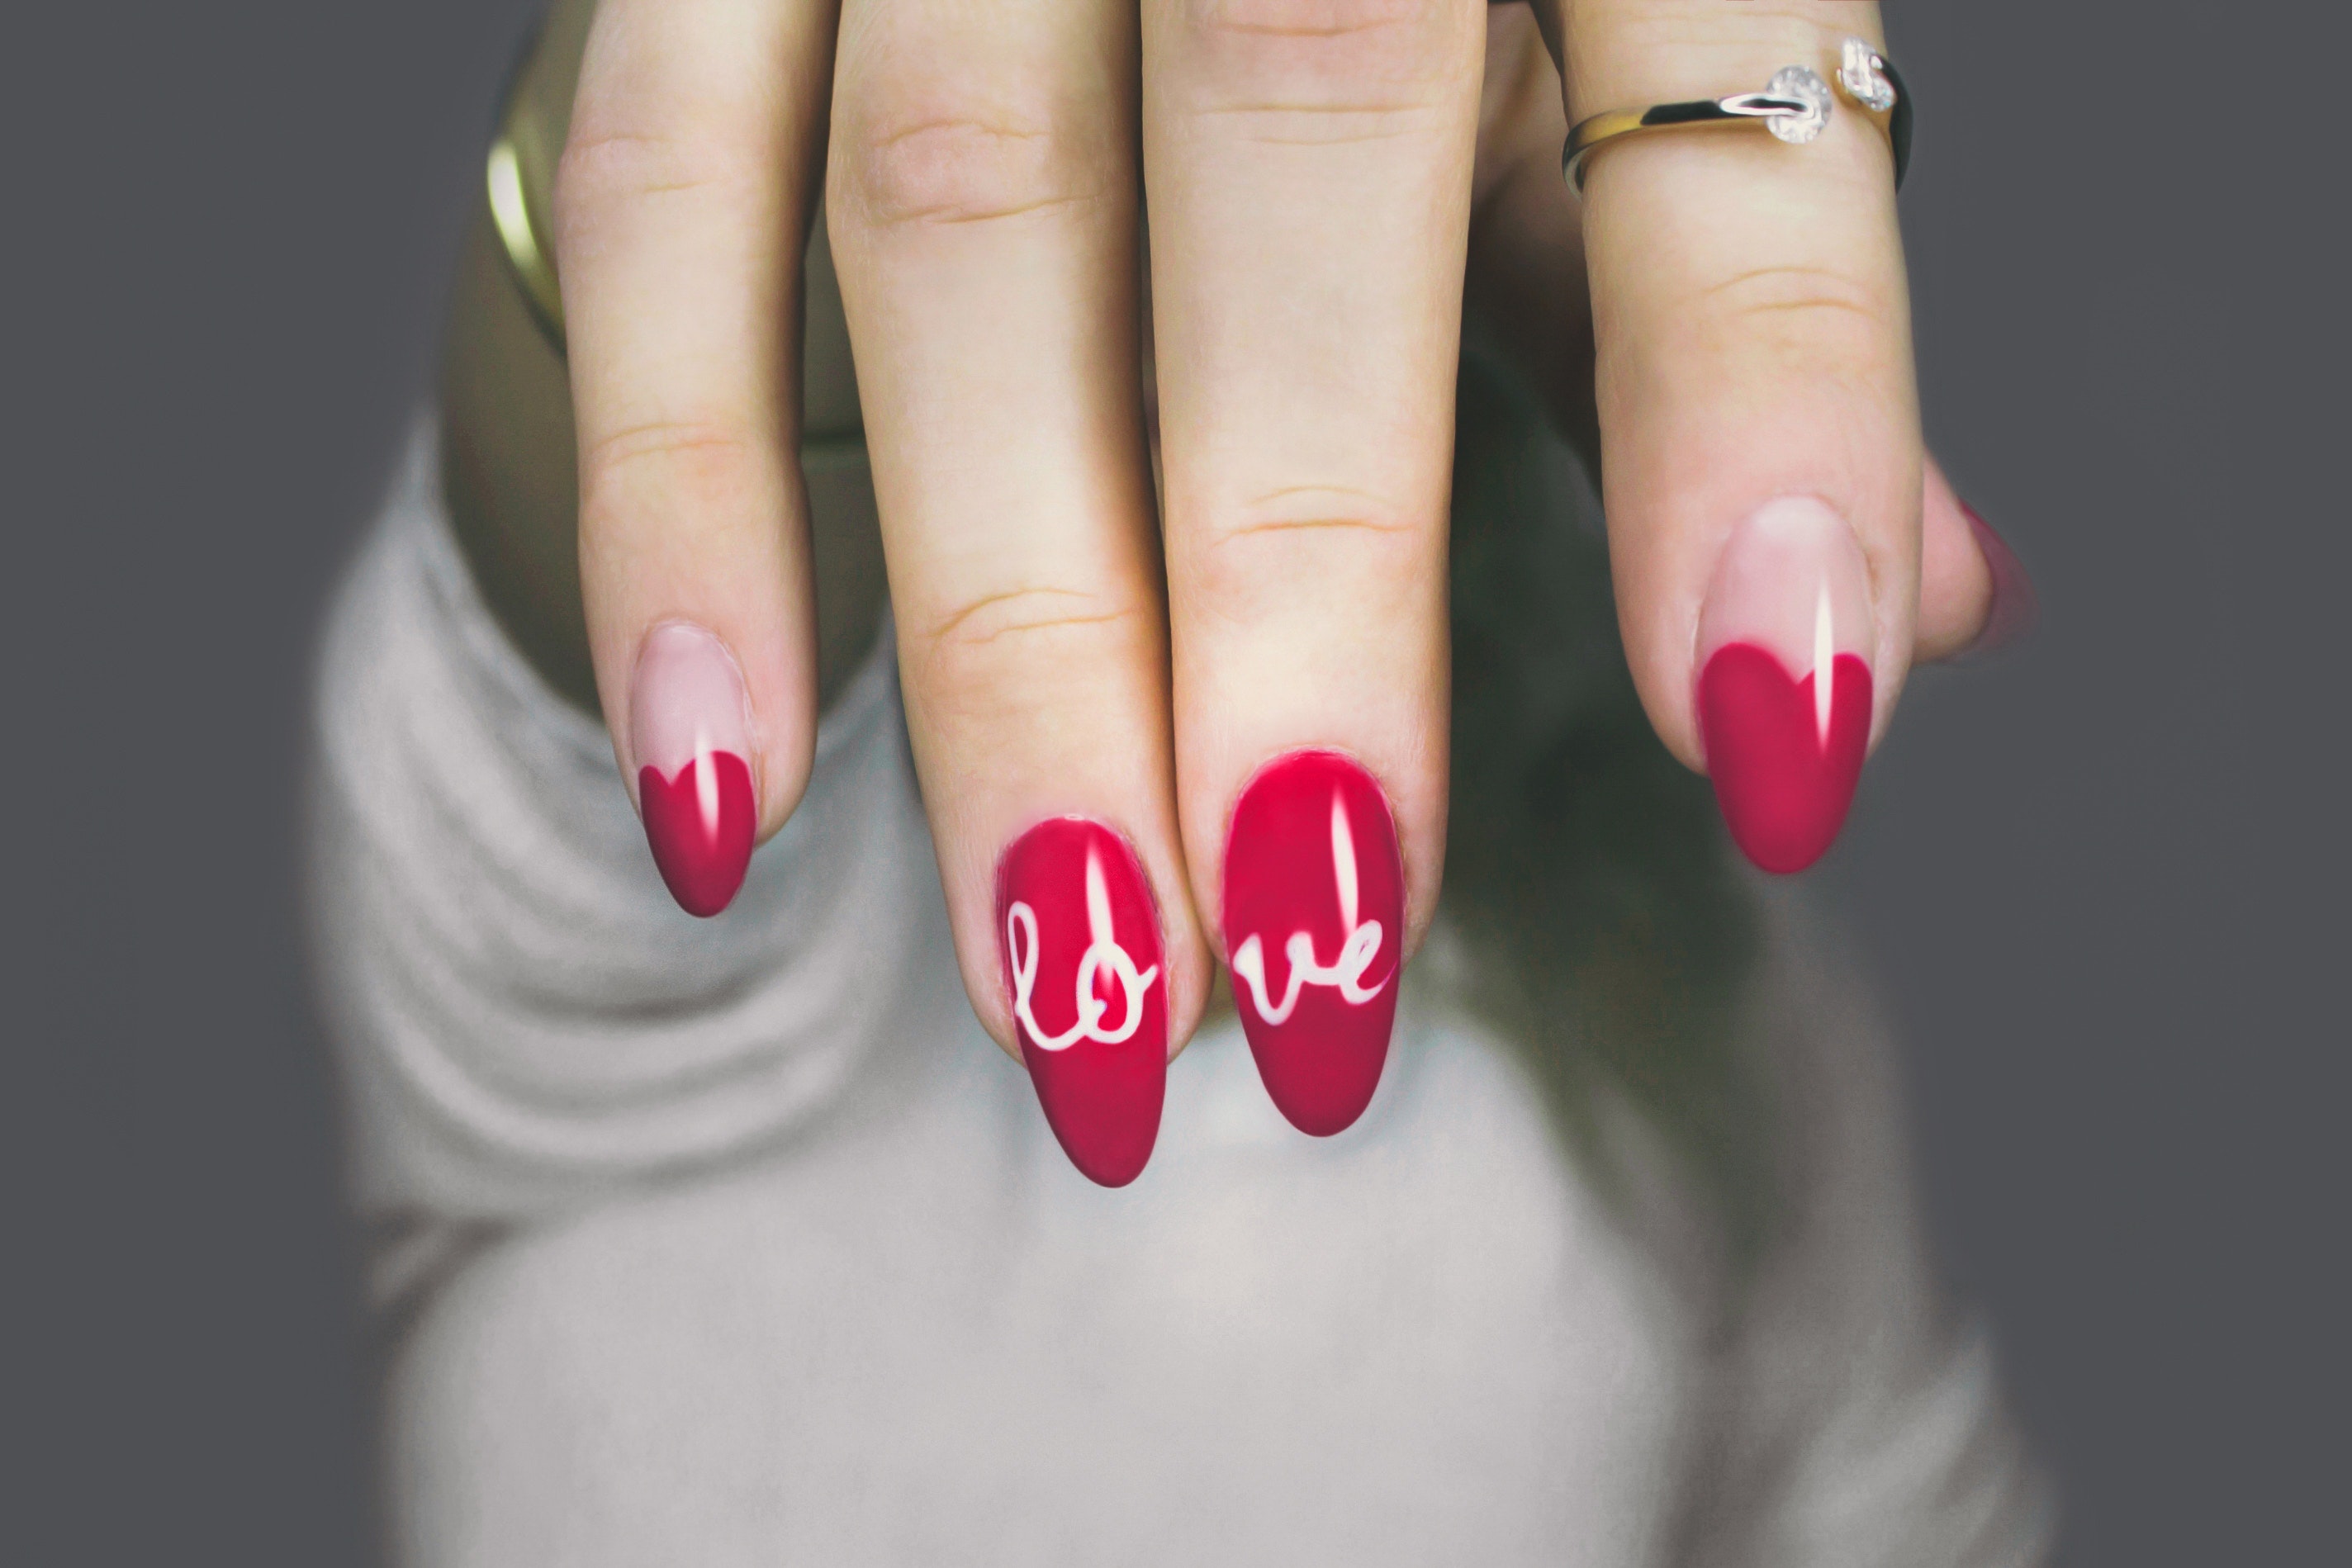 Complete Nail Technician Course Package | The Beauty Academy